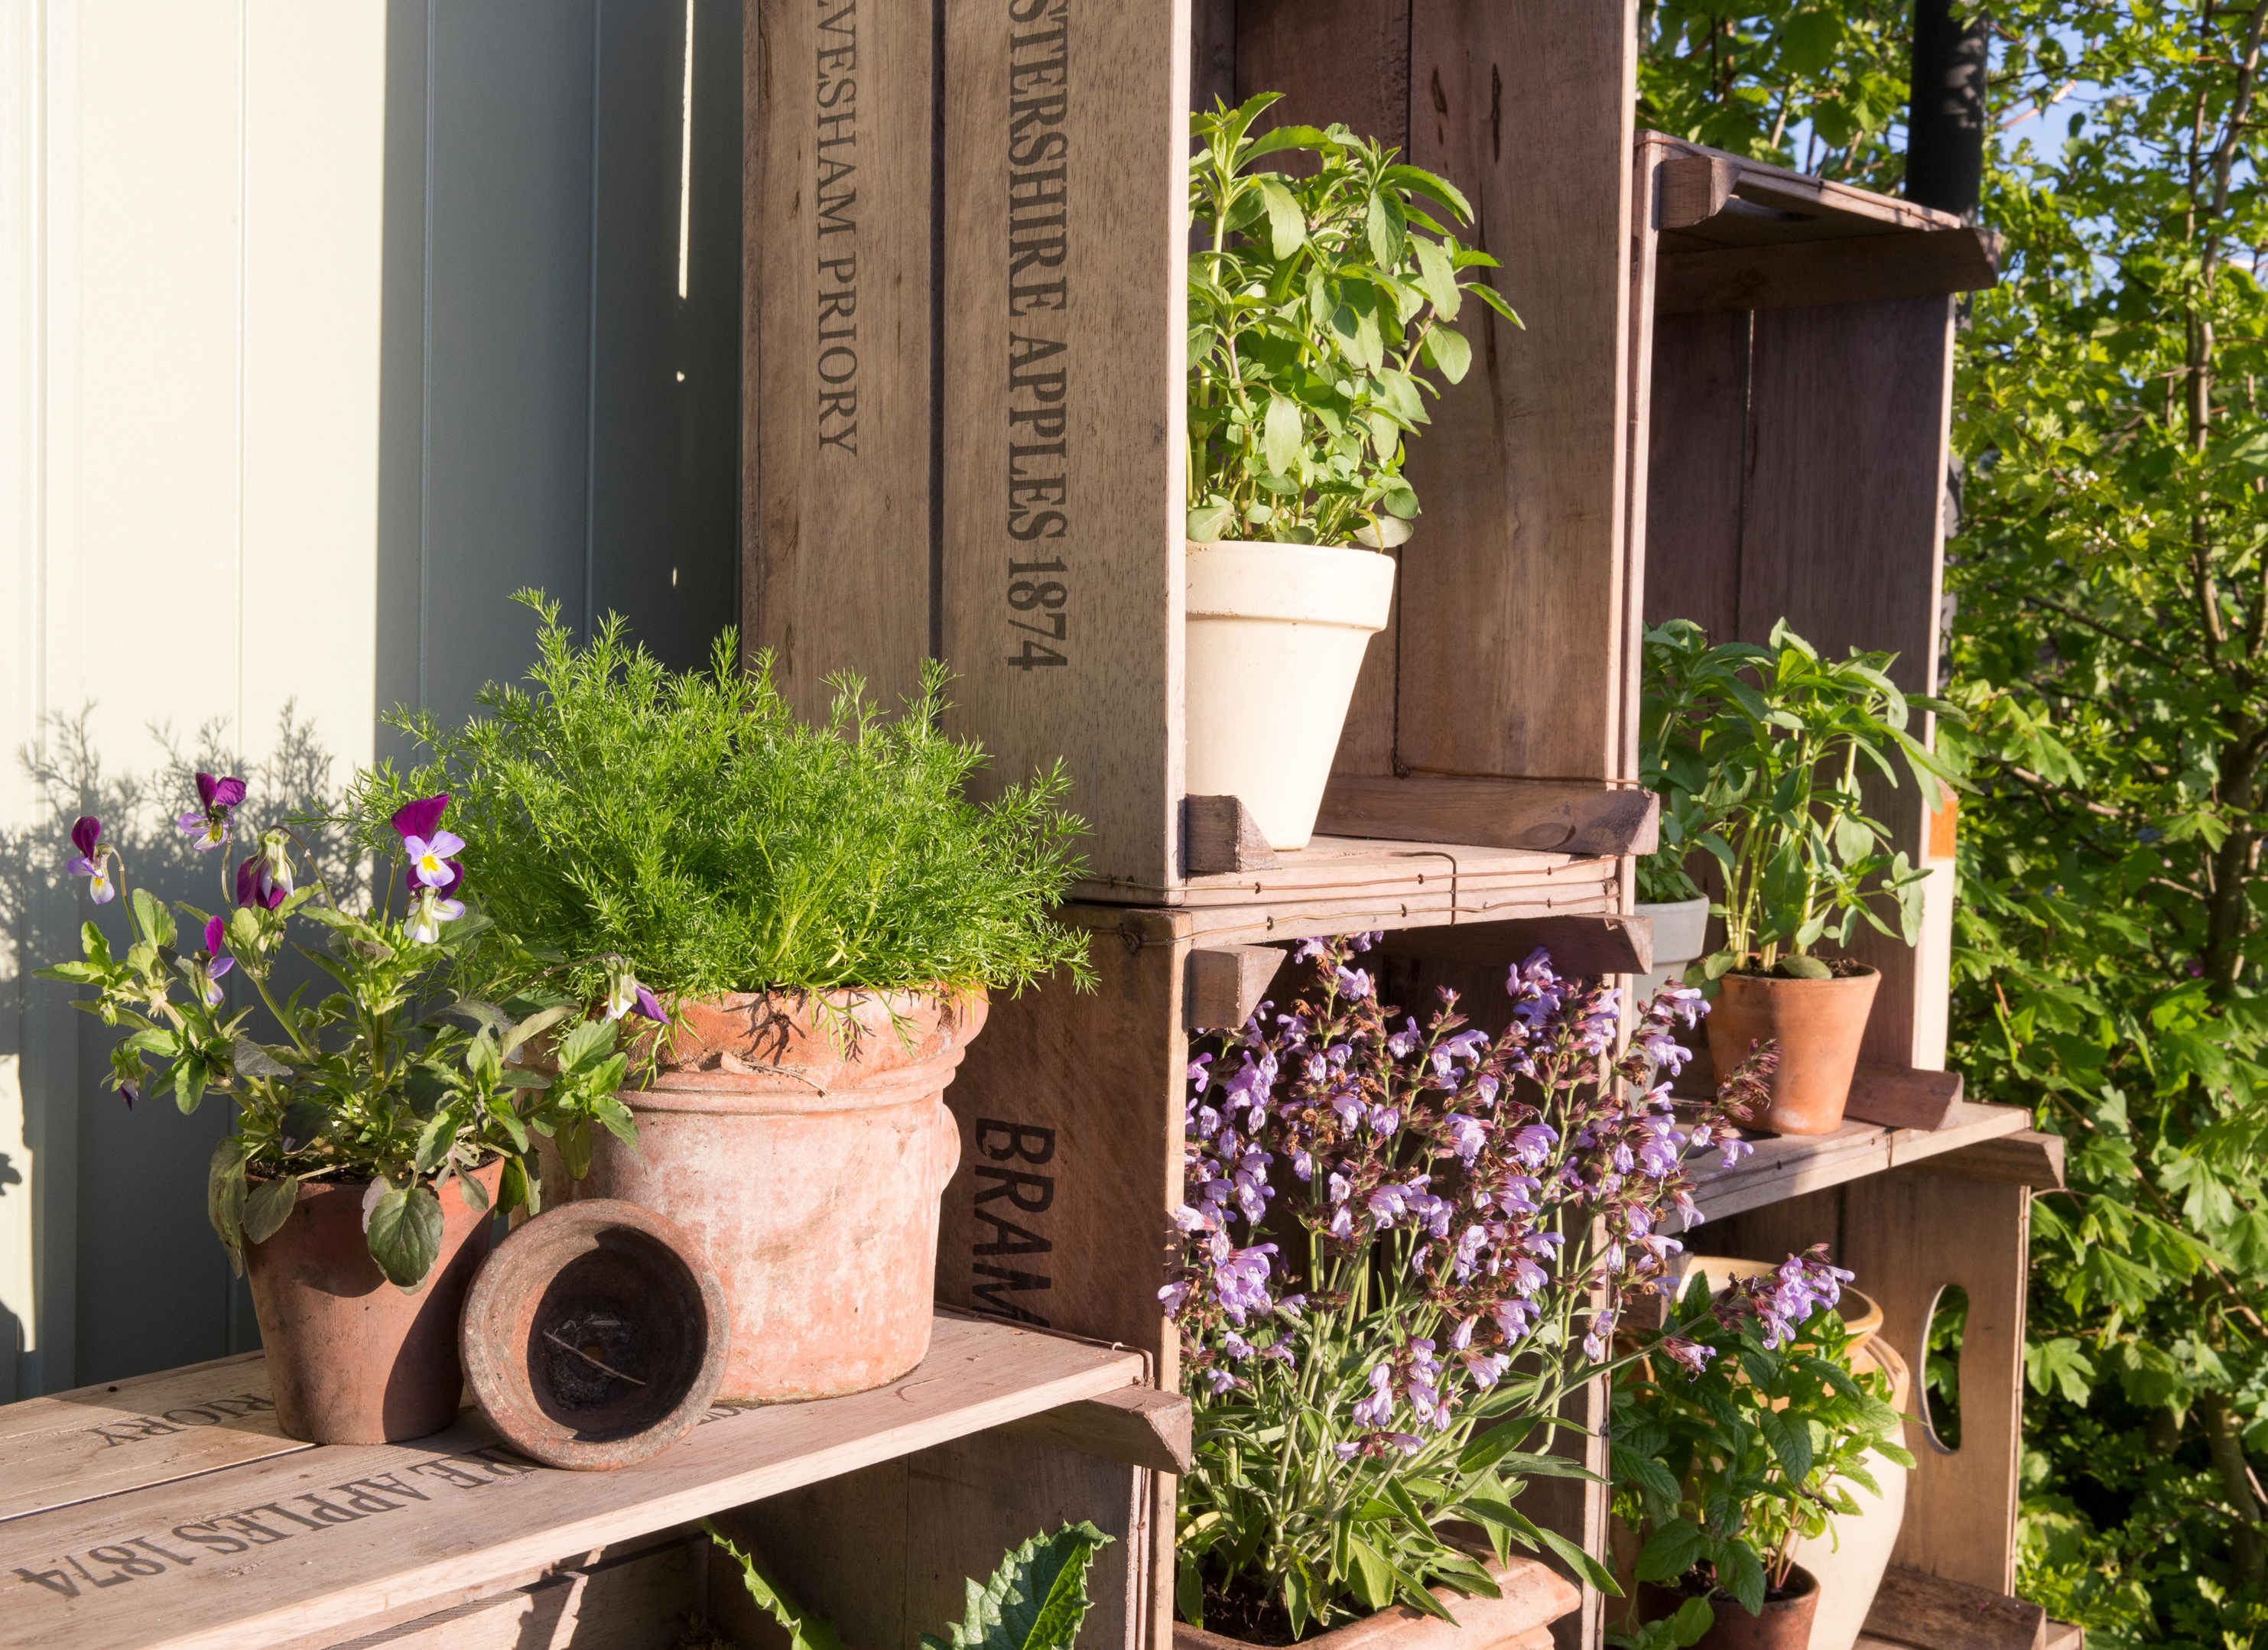 Pots planted with herbs (Alamy/PA)